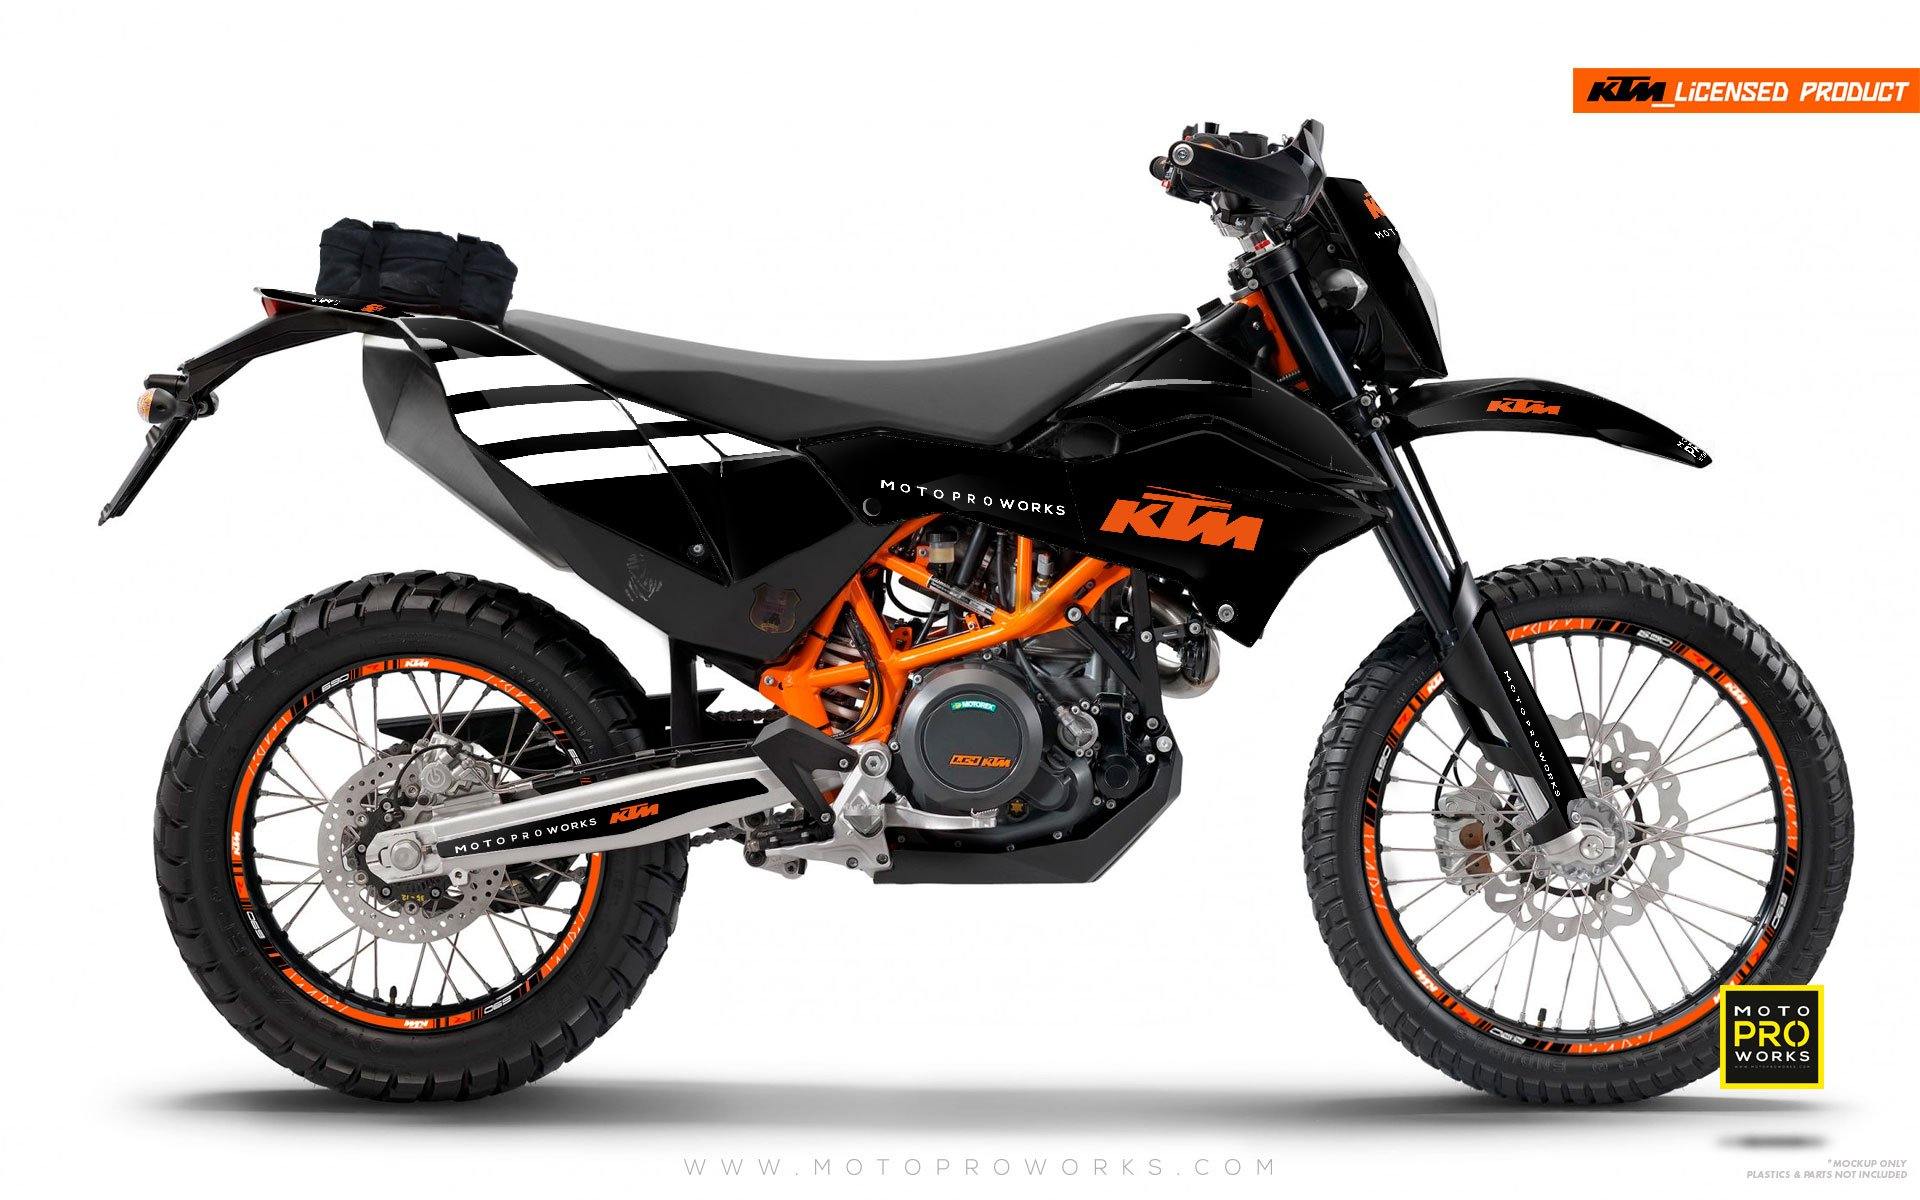 KTM GRAPHIC KIT - "FLAT ICON" (black) - MotoProWorks | Decals and Bike Graphic kit